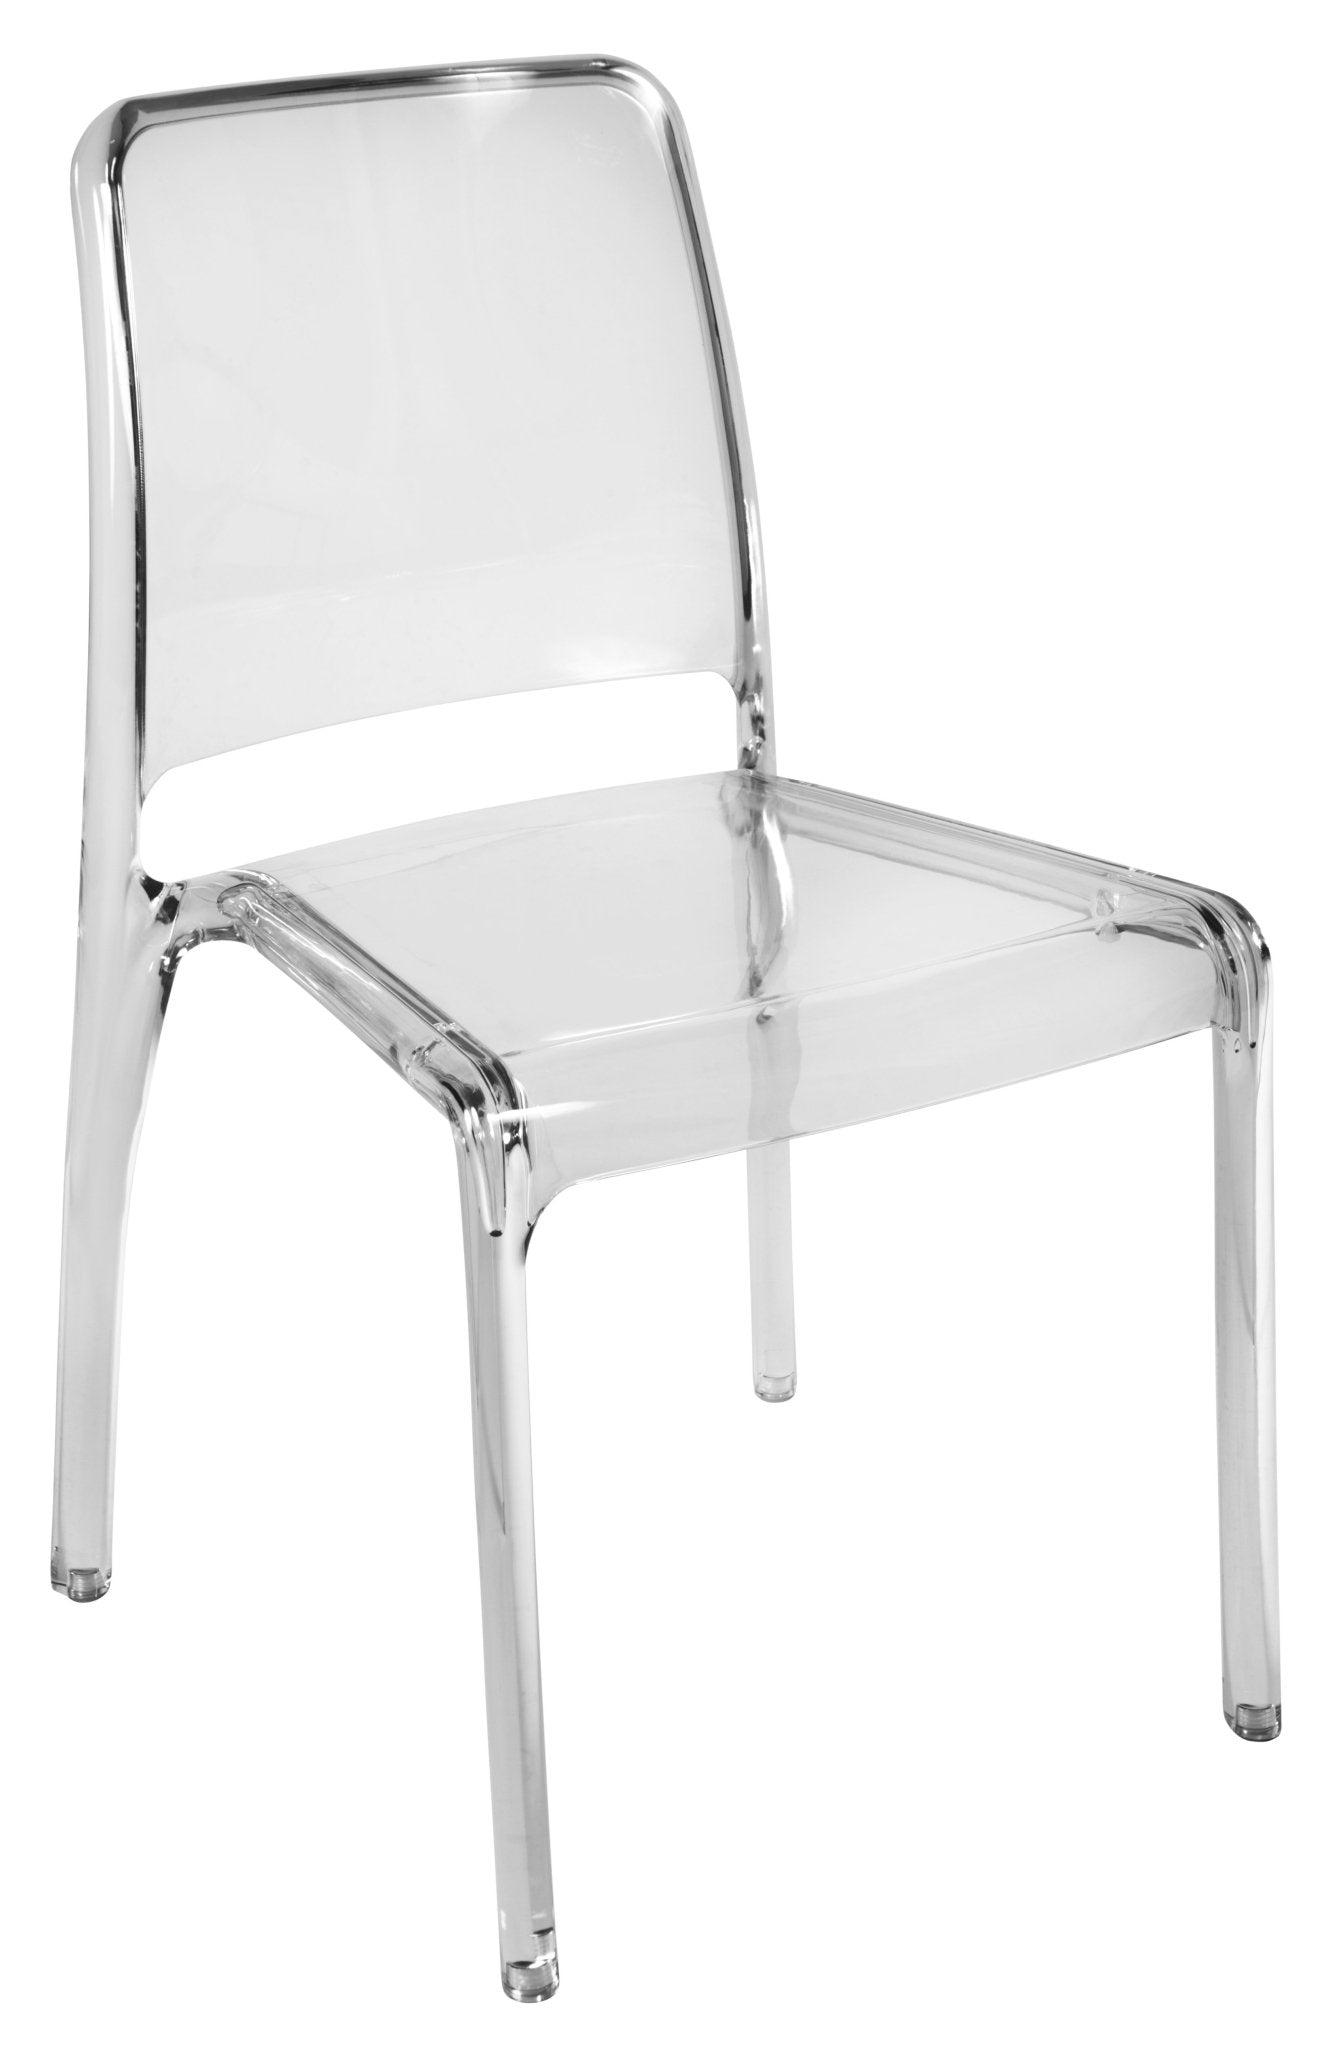 Clarity dining room chair (clear) pack of 4 - crimblefest furniture - image 1